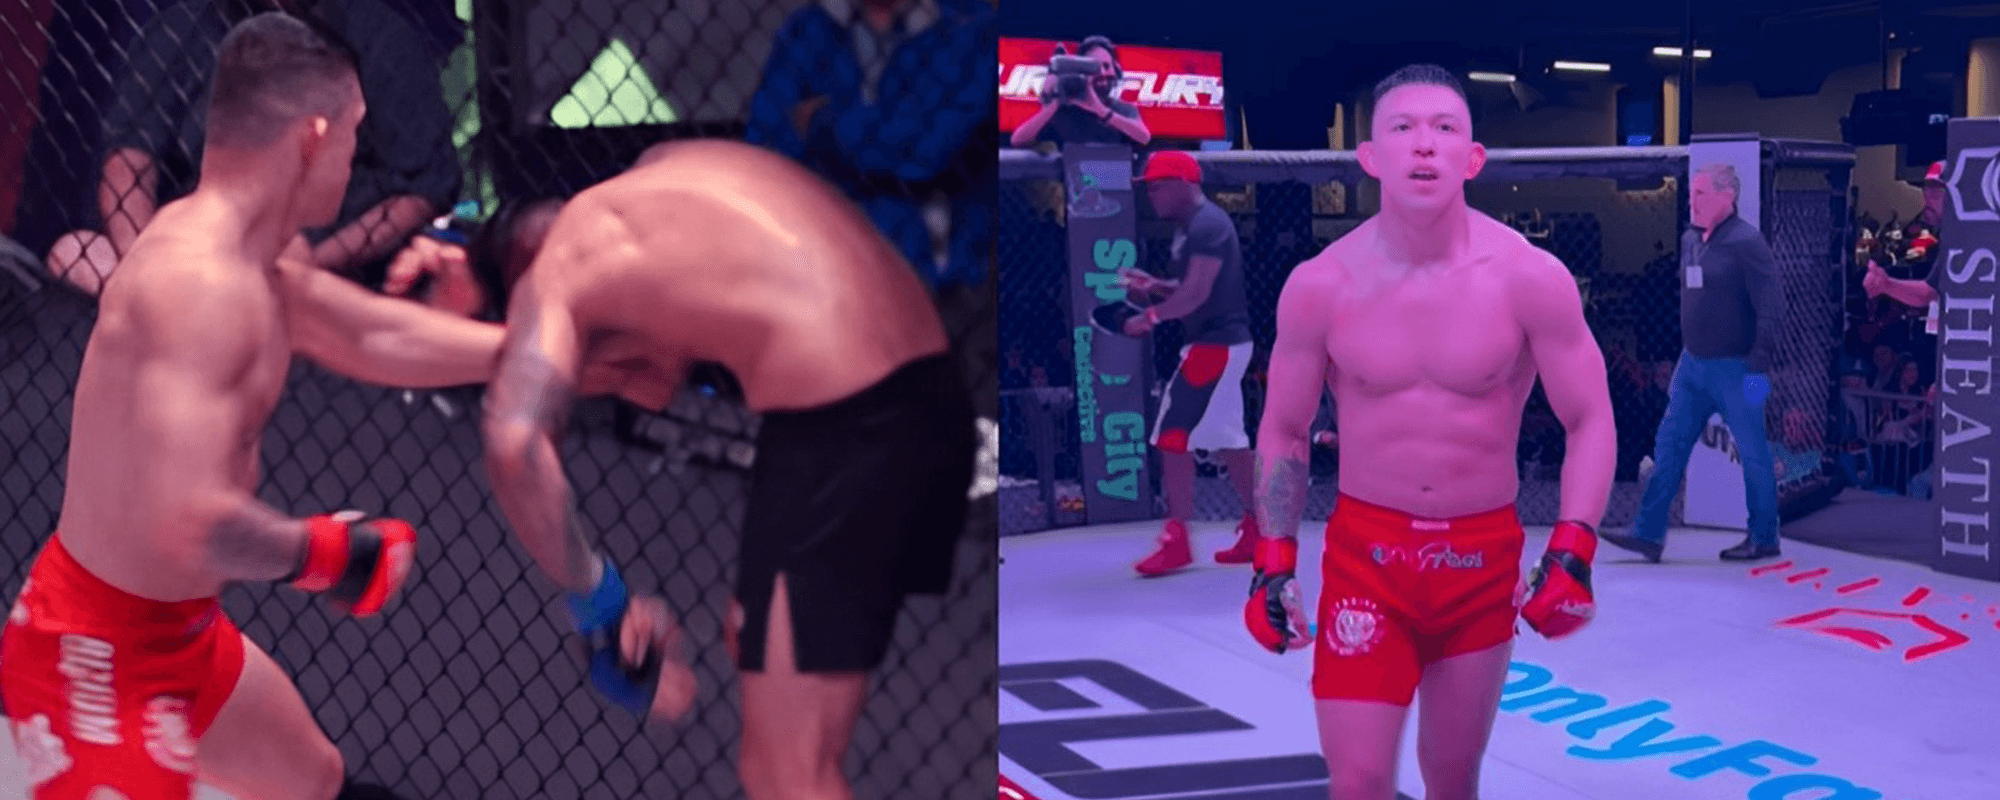 Kody Steele Attracts UFC Attention After Achieving 6-0 In MMA